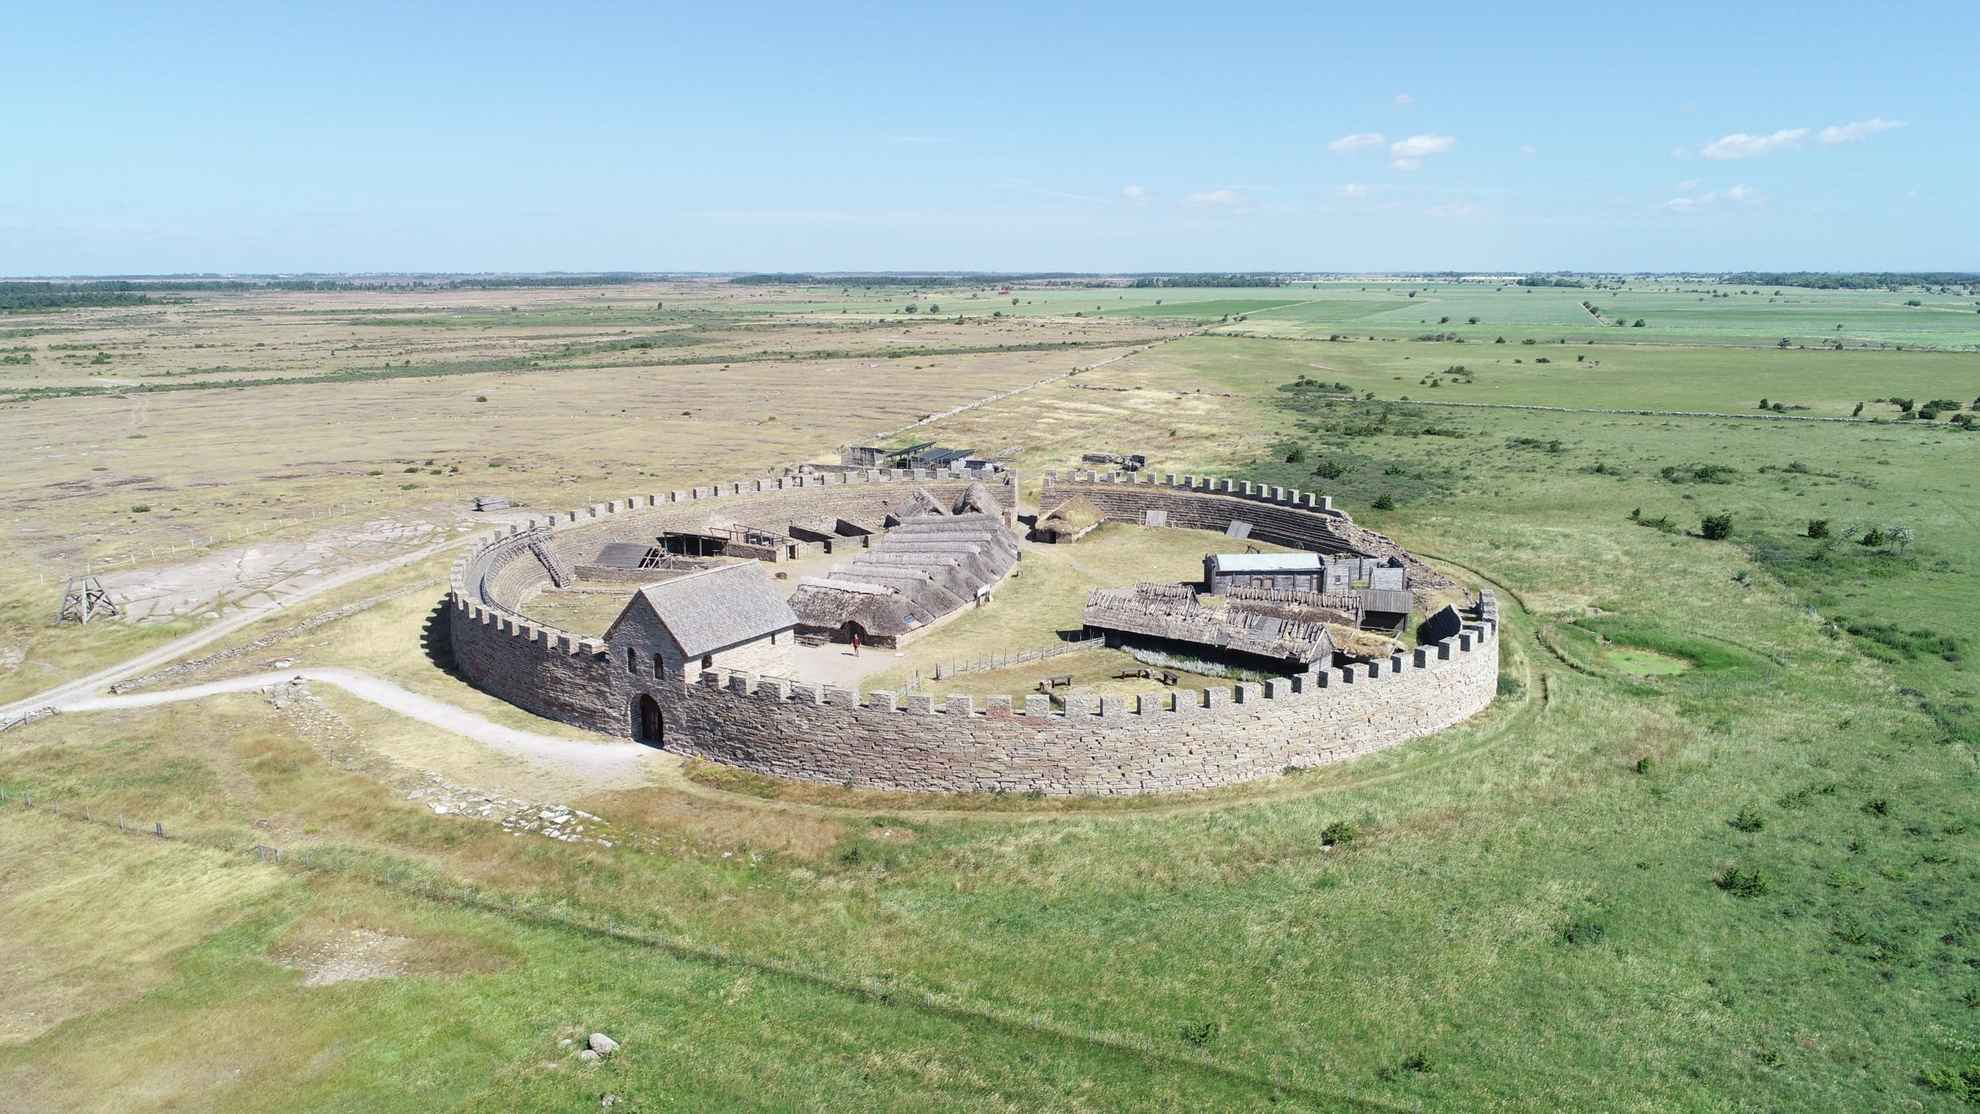 An round stone fortress surrounded by vast fields.